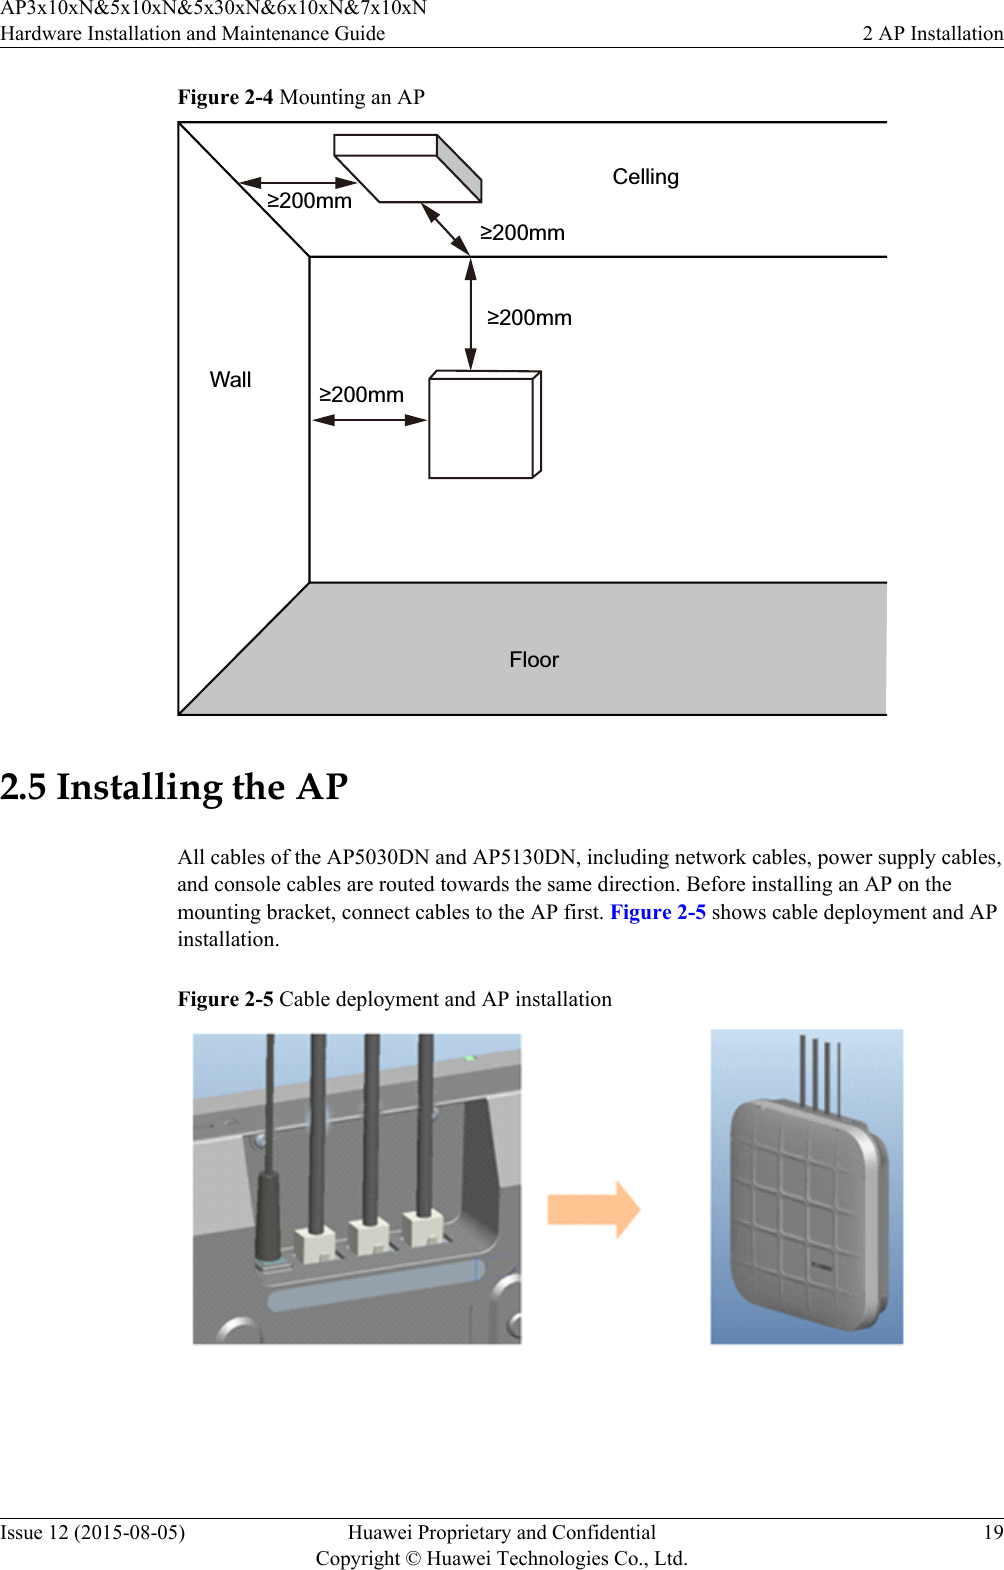 Figure 2-4 Mounting an AP≥200mm≥200mm≥200mm≥200mmFloorCellingWall2.5 Installing the APAll cables of the AP5030DN and AP5130DN, including network cables, power supply cables,and console cables are routed towards the same direction. Before installing an AP on themounting bracket, connect cables to the AP first. Figure 2-5 shows cable deployment and APinstallation.Figure 2-5 Cable deployment and AP installationAP3x10xN&amp;5x10xN&amp;5x30xN&amp;6x10xN&amp;7x10xNHardware Installation and Maintenance Guide 2 AP InstallationIssue 12 (2015-08-05) Huawei Proprietary and ConfidentialCopyright © Huawei Technologies Co., Ltd.19